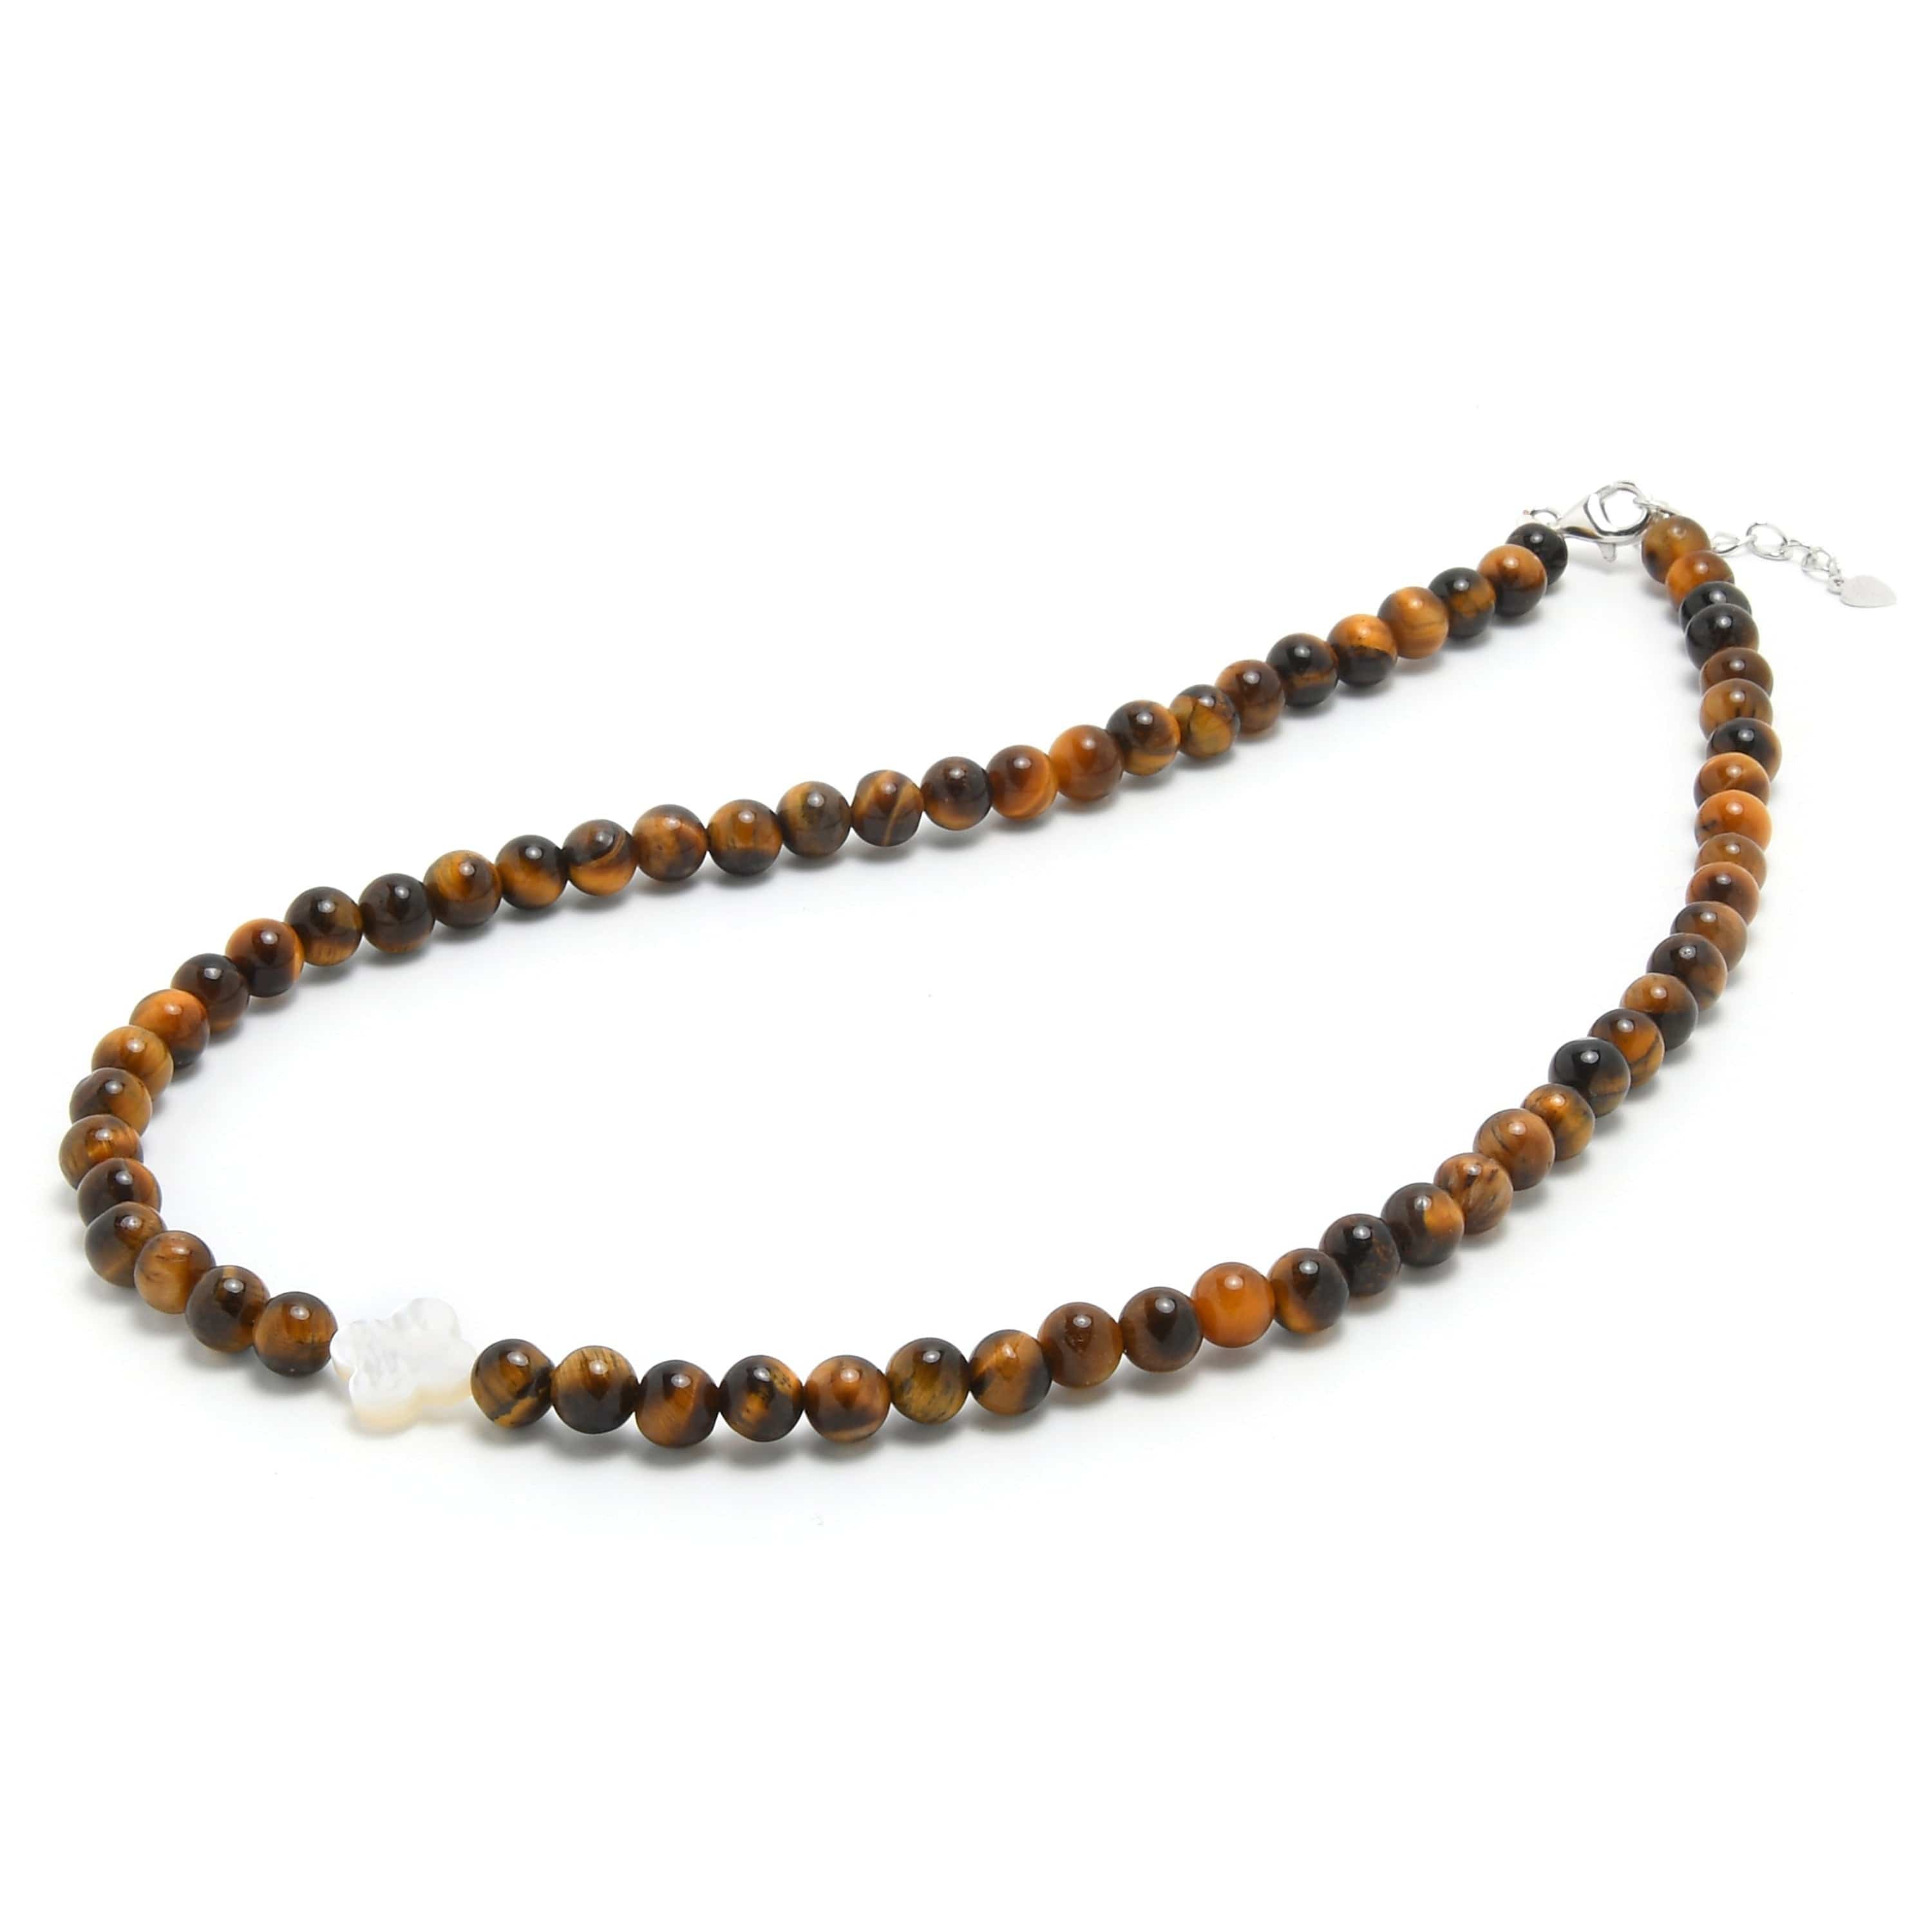 Kalifano Gemstone Bracelets 6mm Tiger Eye Necklace with Mother of Pearl Clover Pendant N6TE-CL-MOP